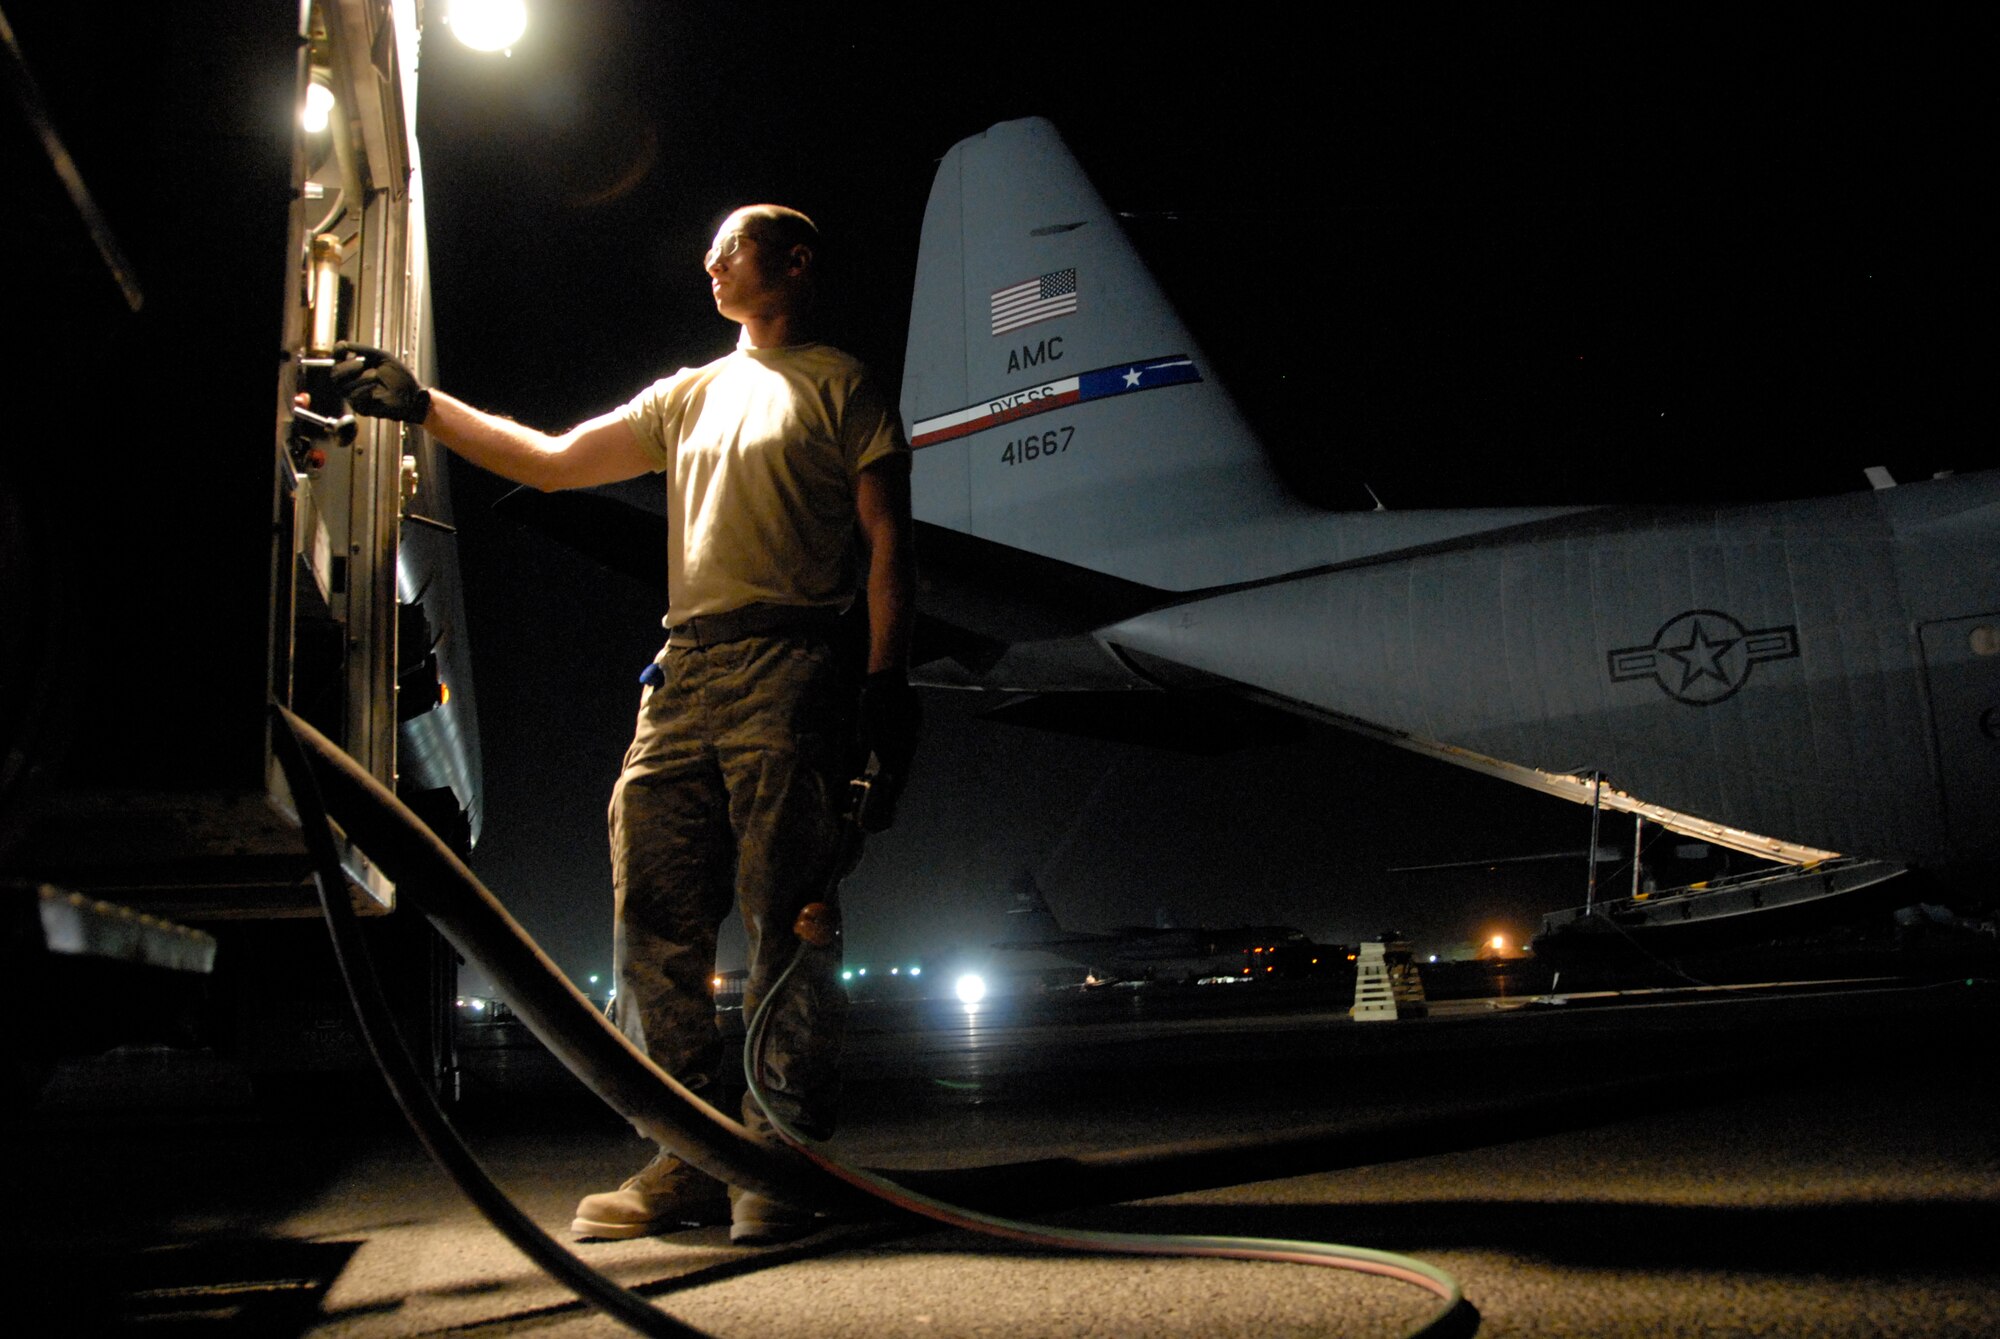 SOUTHWEST ASIA -- Senior Airman Brian Gunther with the 386th Expeditionary Logistics Readiness Squadron’s fuels management flight tops off the tanks of an Air Force C-130 Hercules with nearly 2,500 gallons of JP8 fuel in May 2008. The refuel operation took place on an air base in the Persian Gulf Region prior to the aircraft departing for a mission to drop several hundred thousand leaflets over an Iraqi city. Airman Gunther is deployed from Royal Air Force Lakenheath, England. (U.S. Air Force photo/Tech. Sgt. Michael O’Connor)